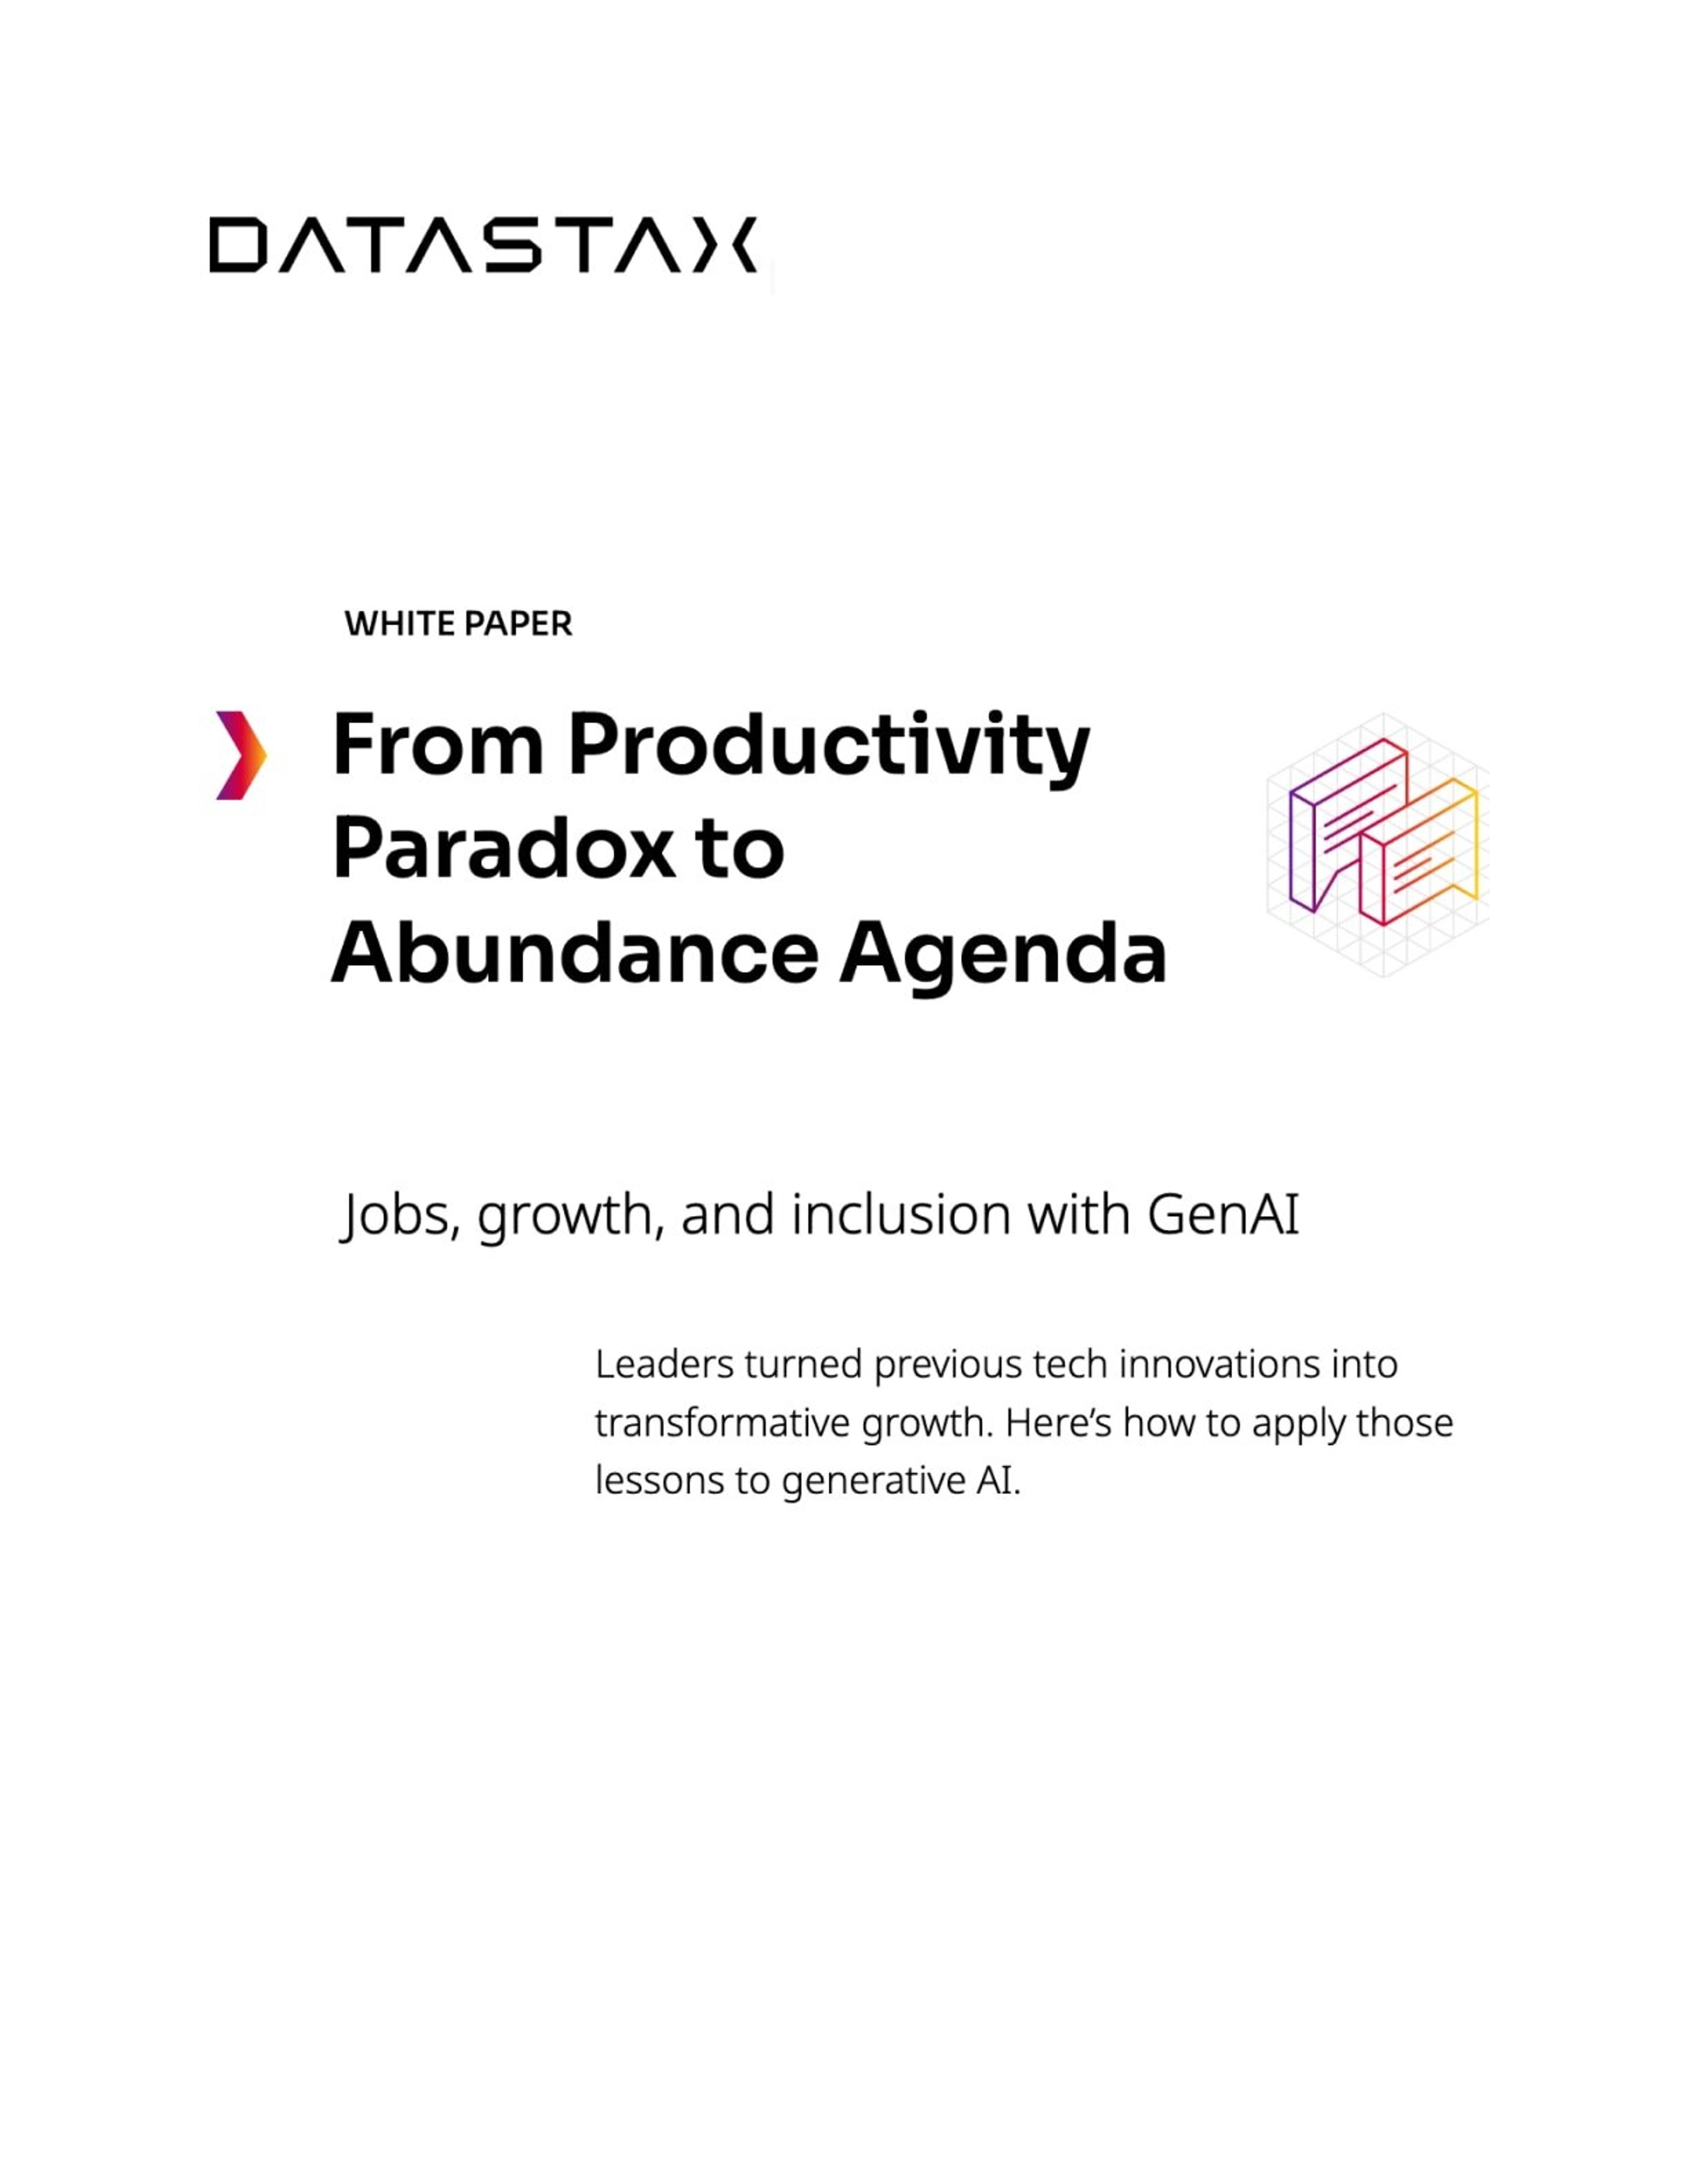 From Productivity Paradox to Abundance Agenda: Jobs, Growth and Inclusion with GenAI